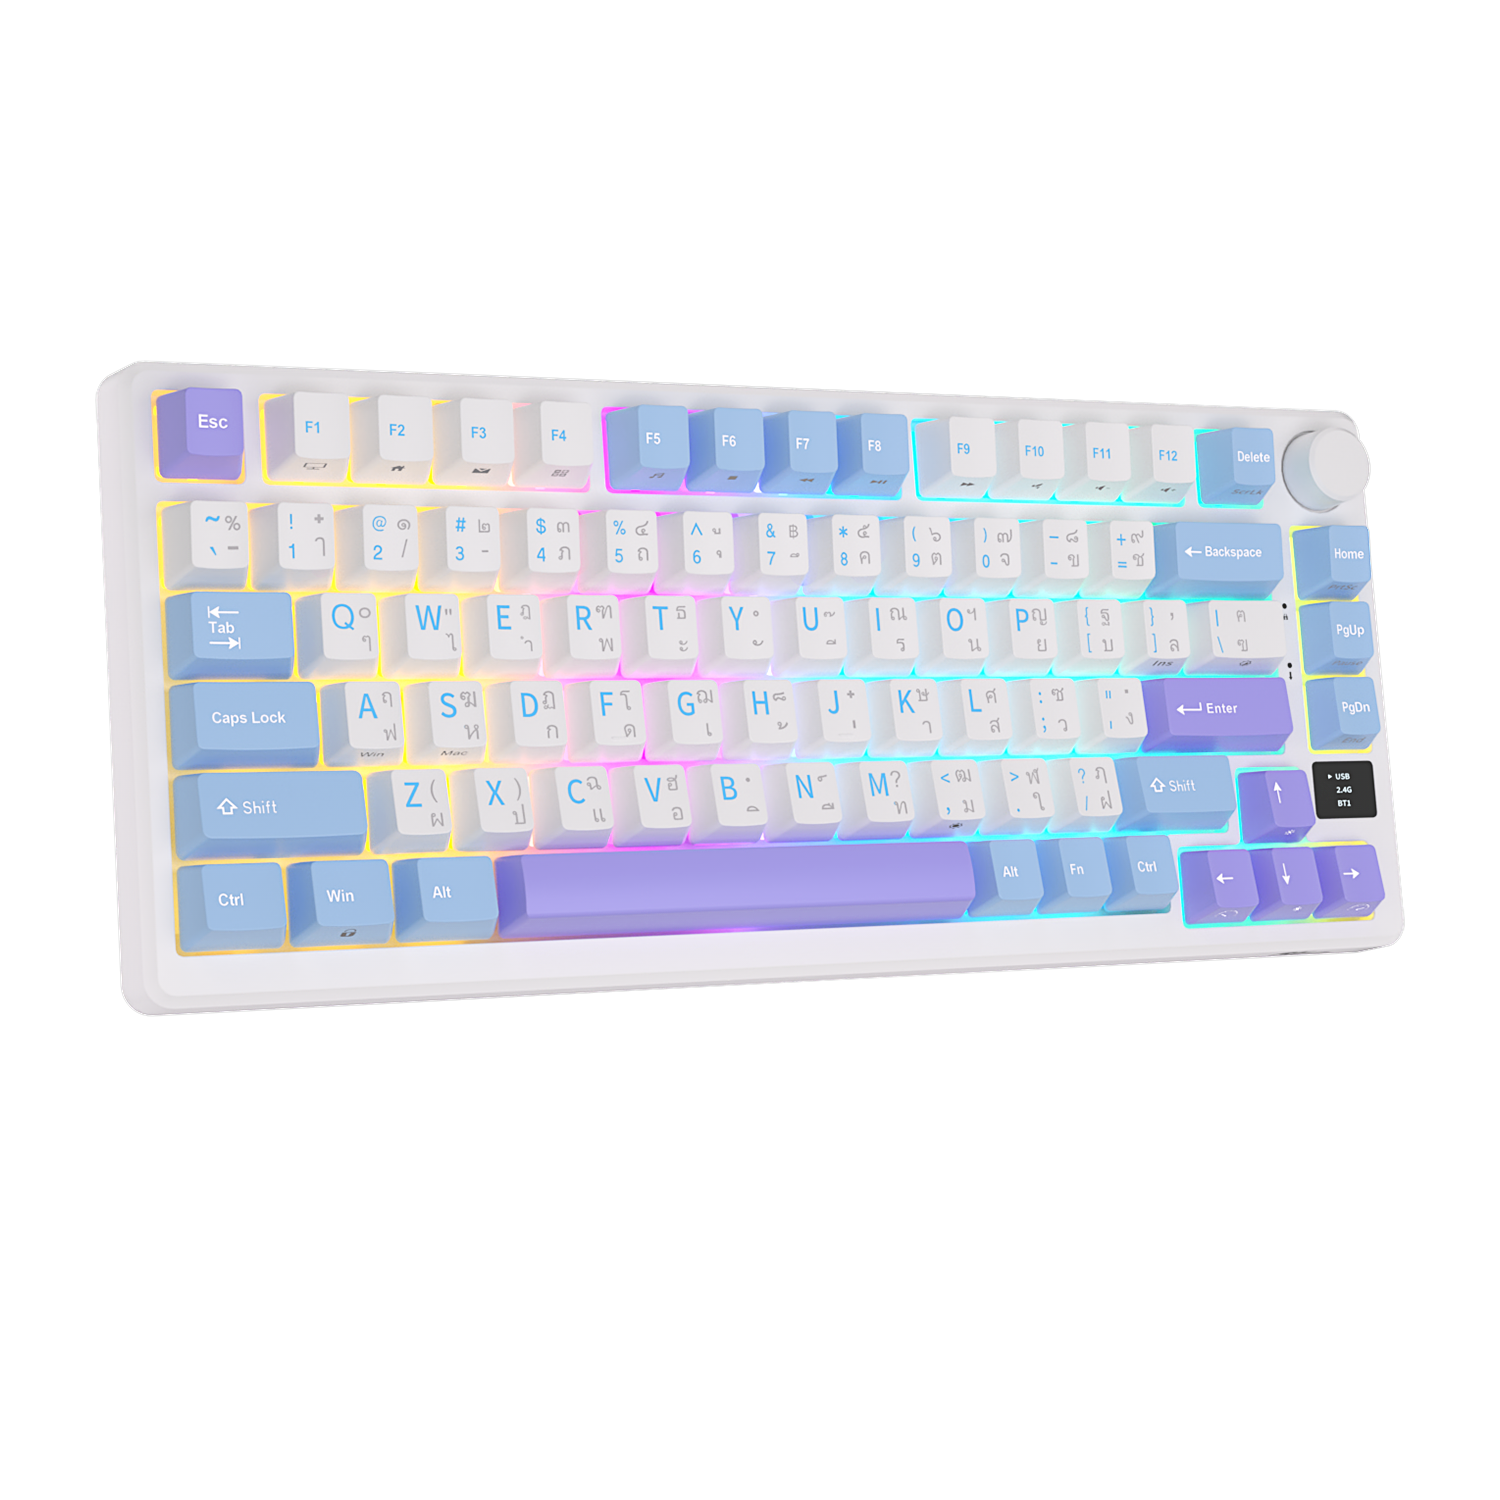 Royal Kludge M75 (RKM75) Taro Milk upright, all keys visible, neon yellow, pink and blue backlight and pastel blue, lavender and white keys. 